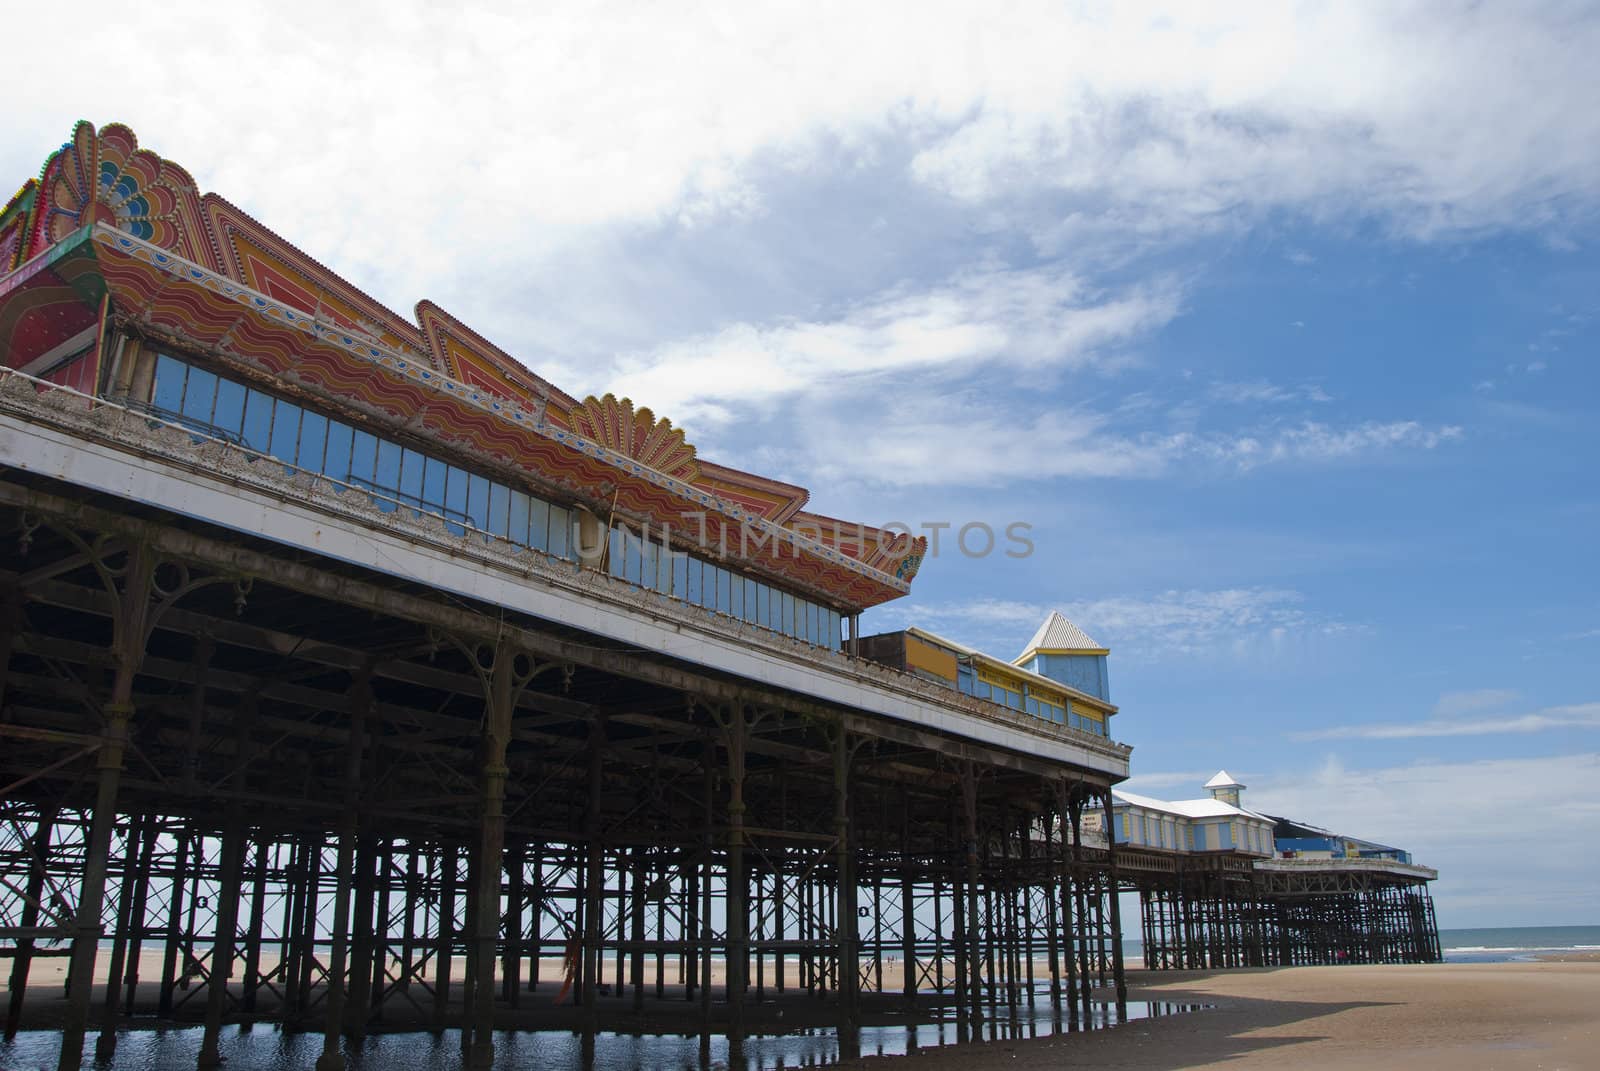 The Victorian Central Pier at Blackpool from the beach looking towards the sea